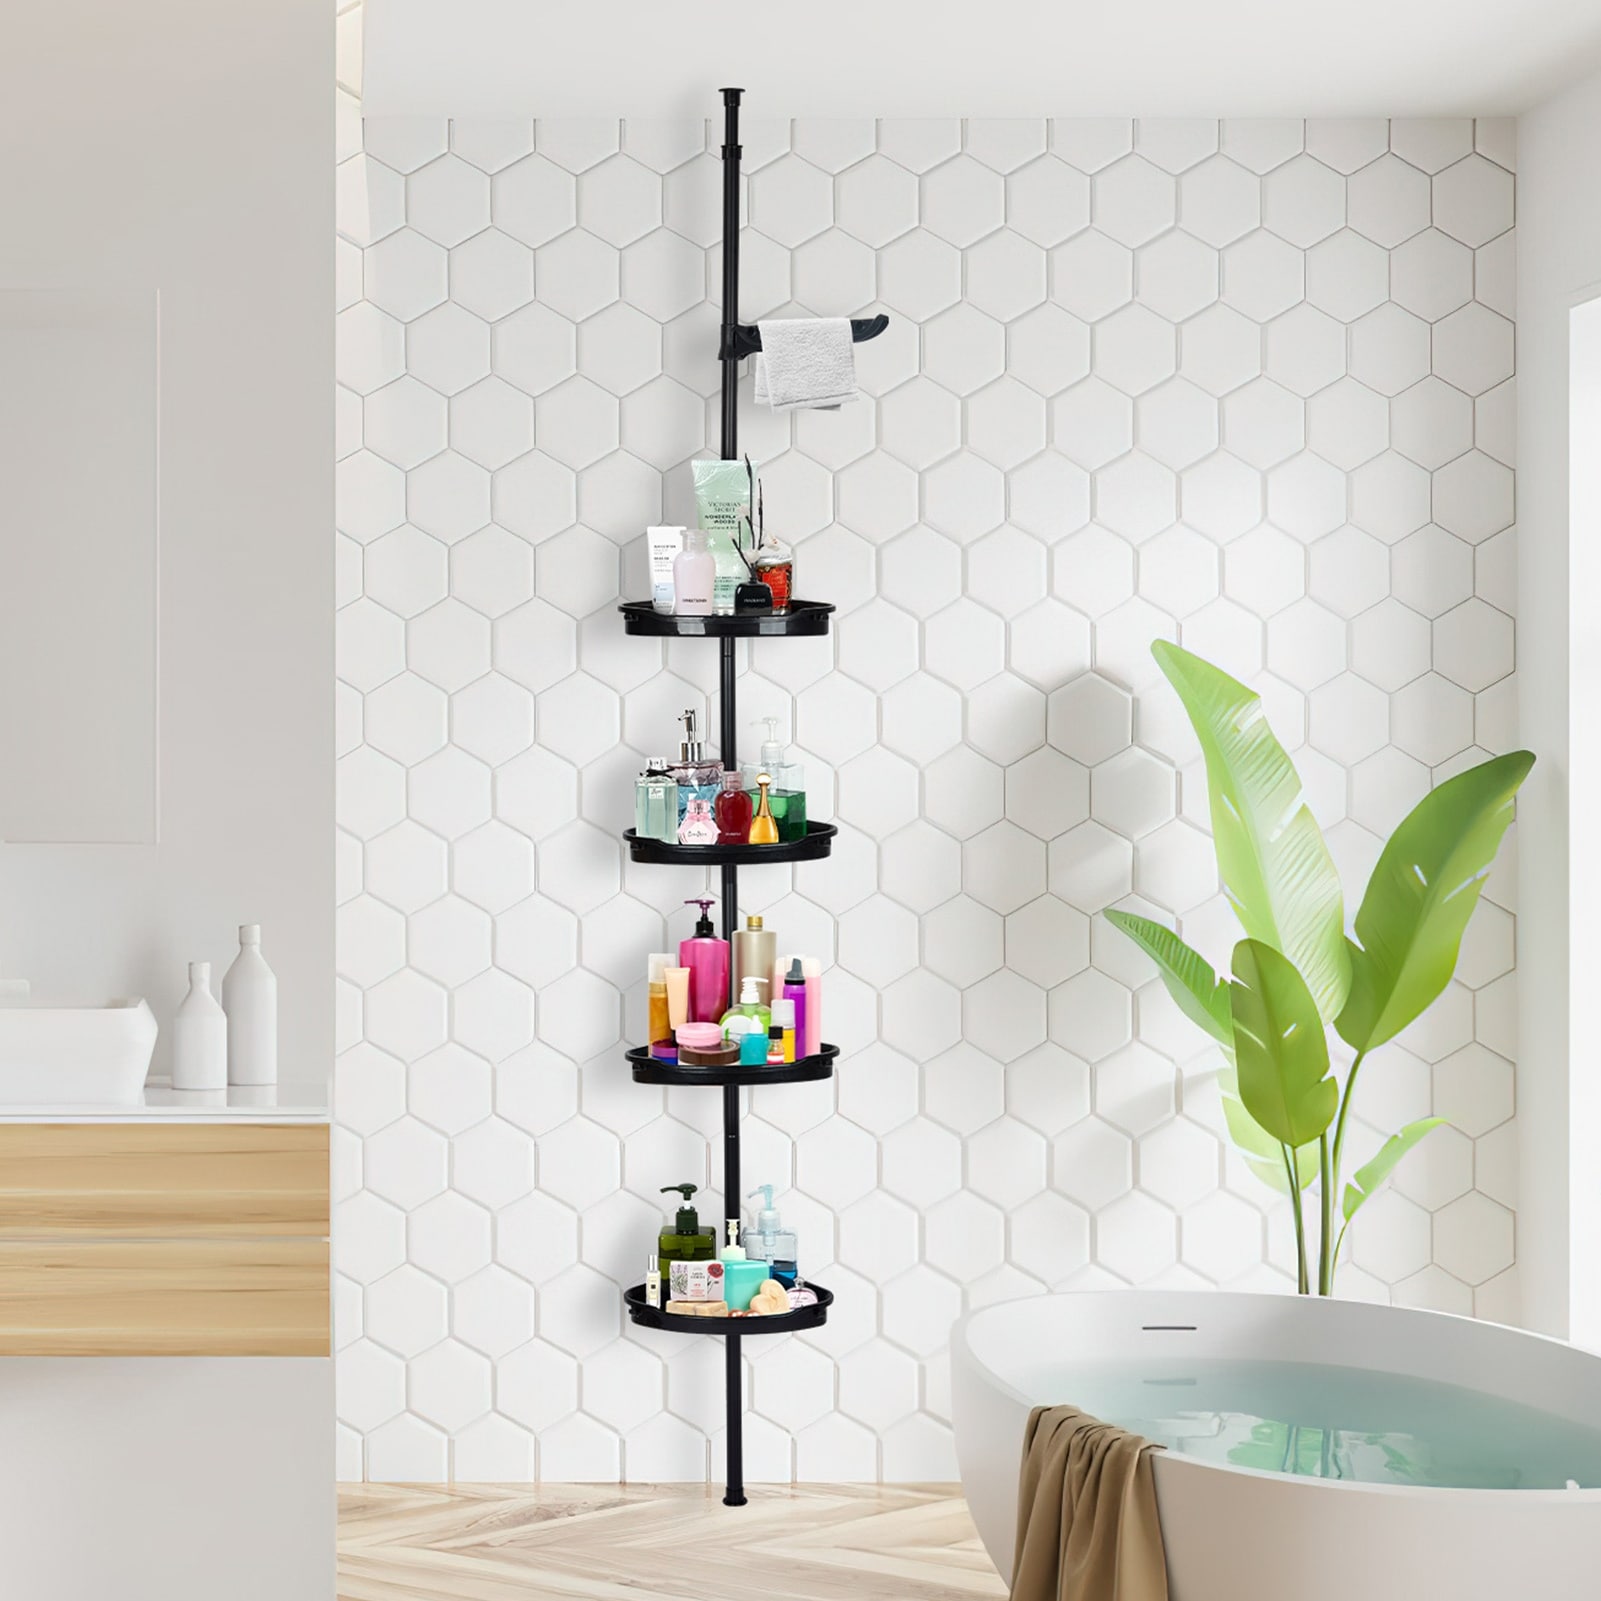 https://ak1.ostkcdn.com/images/products/is/images/direct/fdd558360de4a69a4b6f1bc5d20129deb4cfe993/Shower-Caddy-Corner%2C-4-Tier-Adjustable-Shelves%2C-up-to-123-Inch.jpg